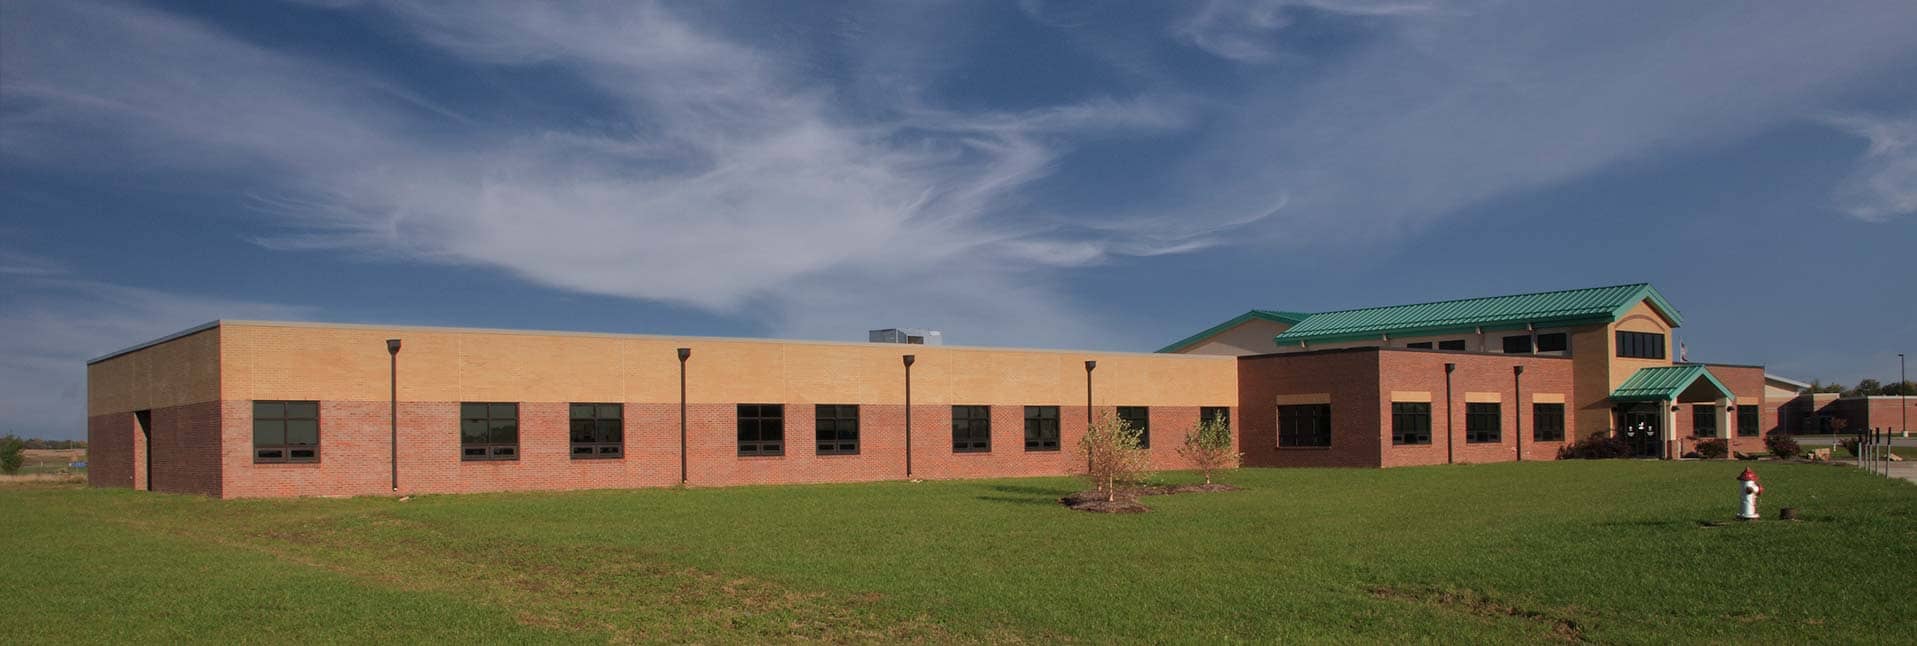 Southern-Boone-County-Elementary-Building